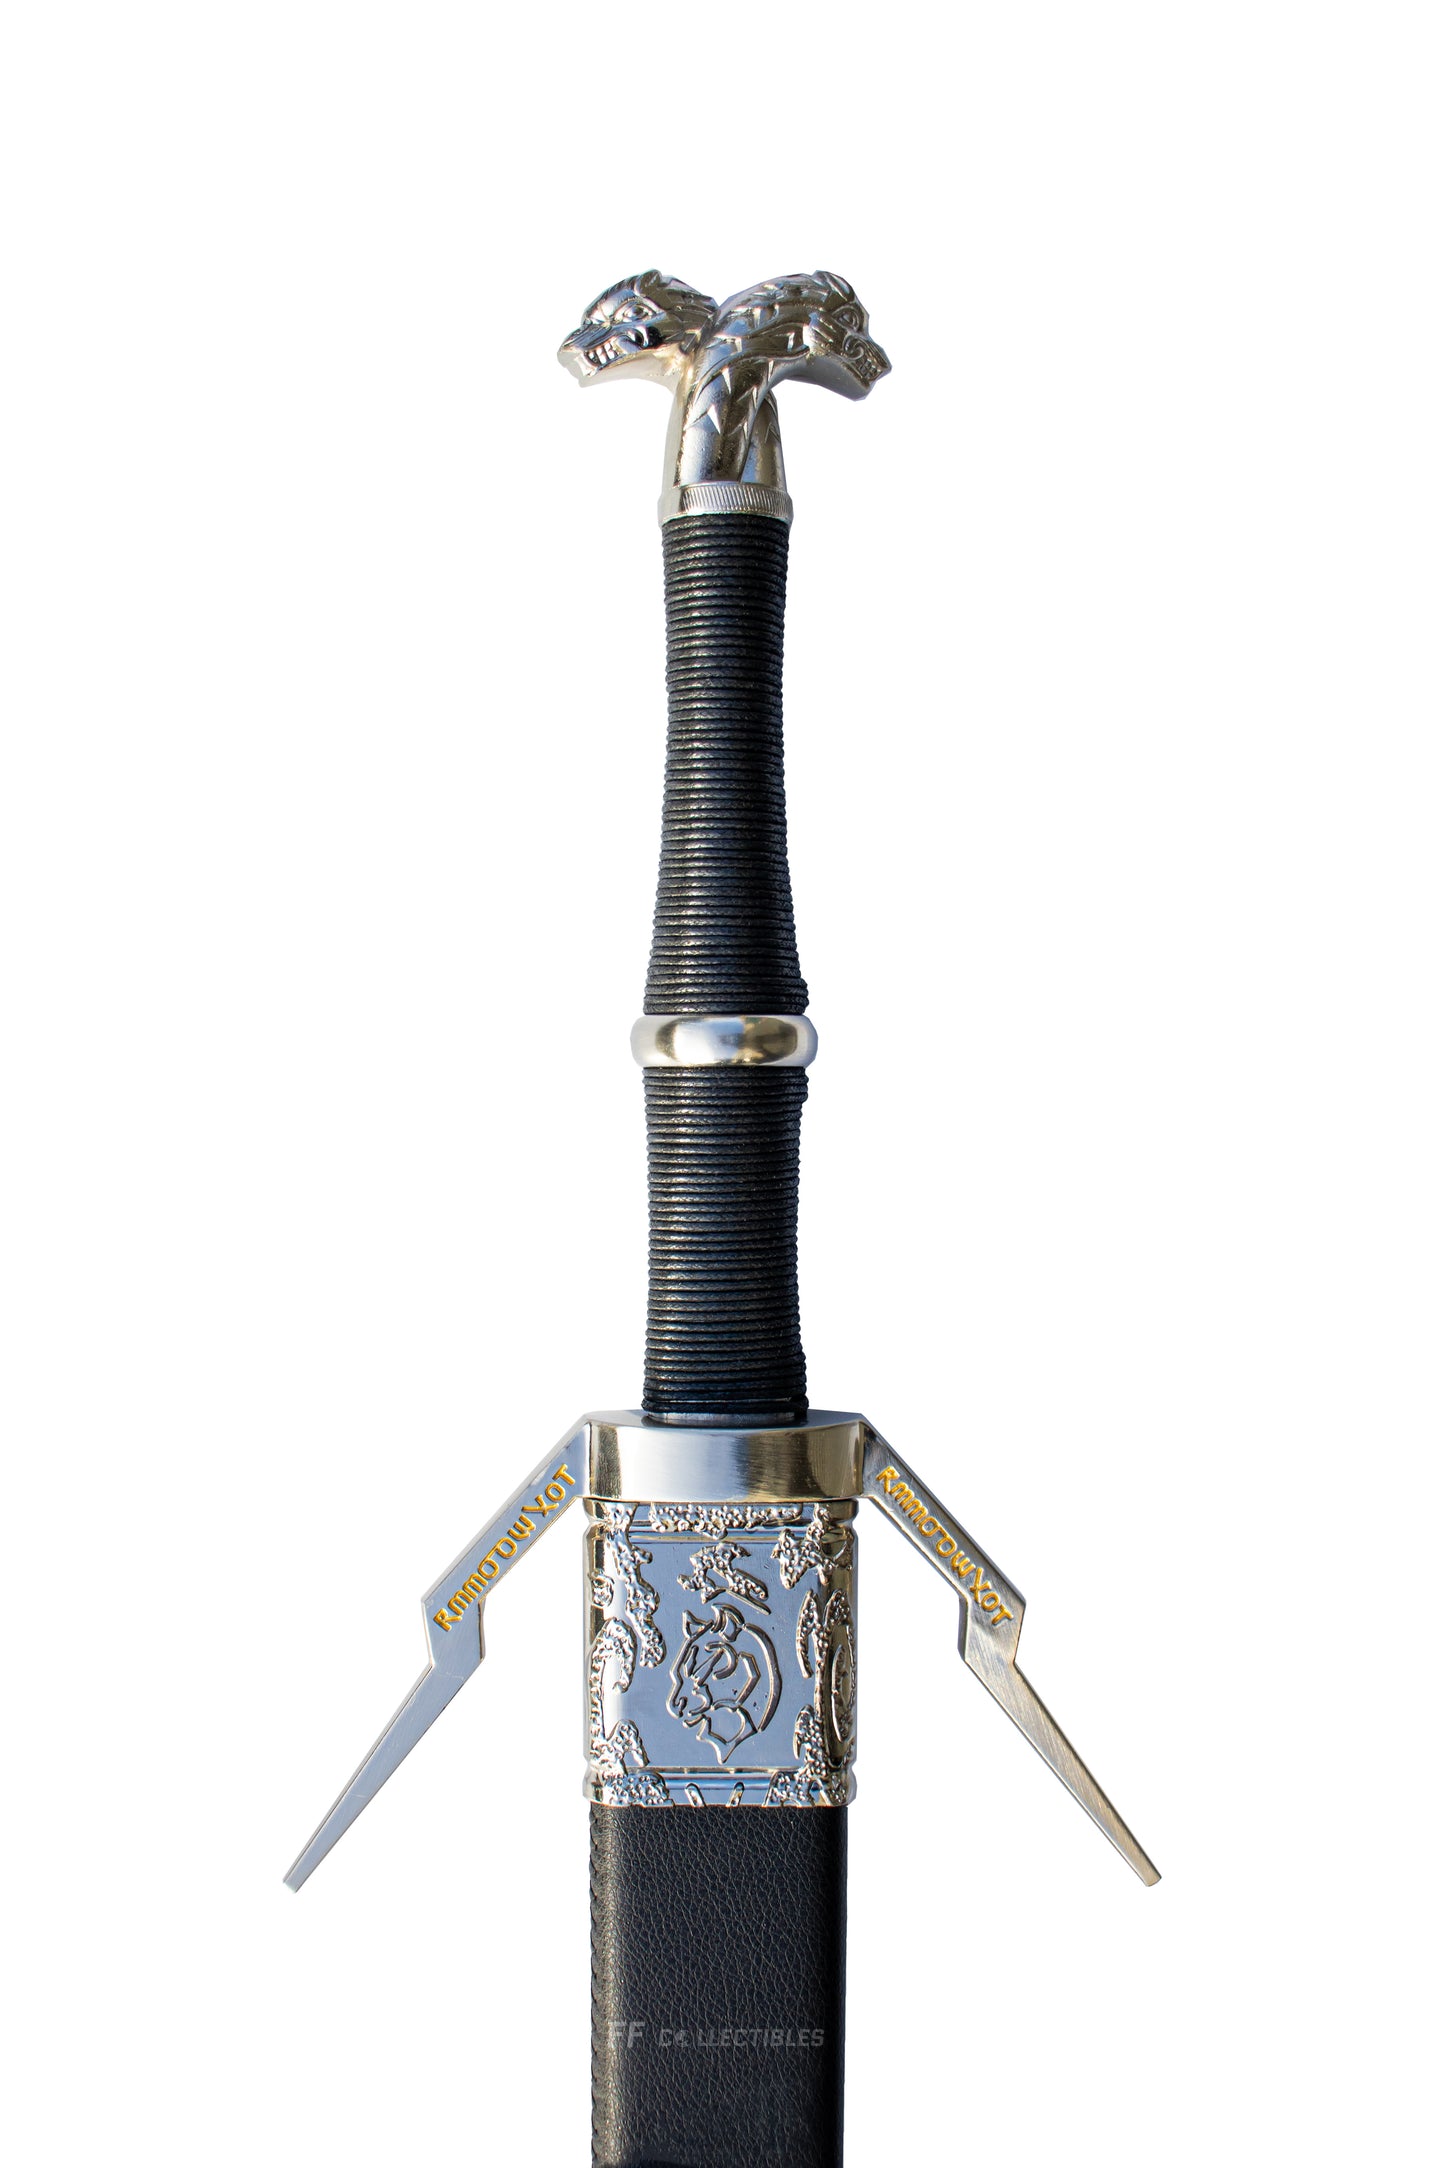 THE WITCHER - GERALT OF RIVIA'S ENHANCED WOLVEN SILVER SWORD